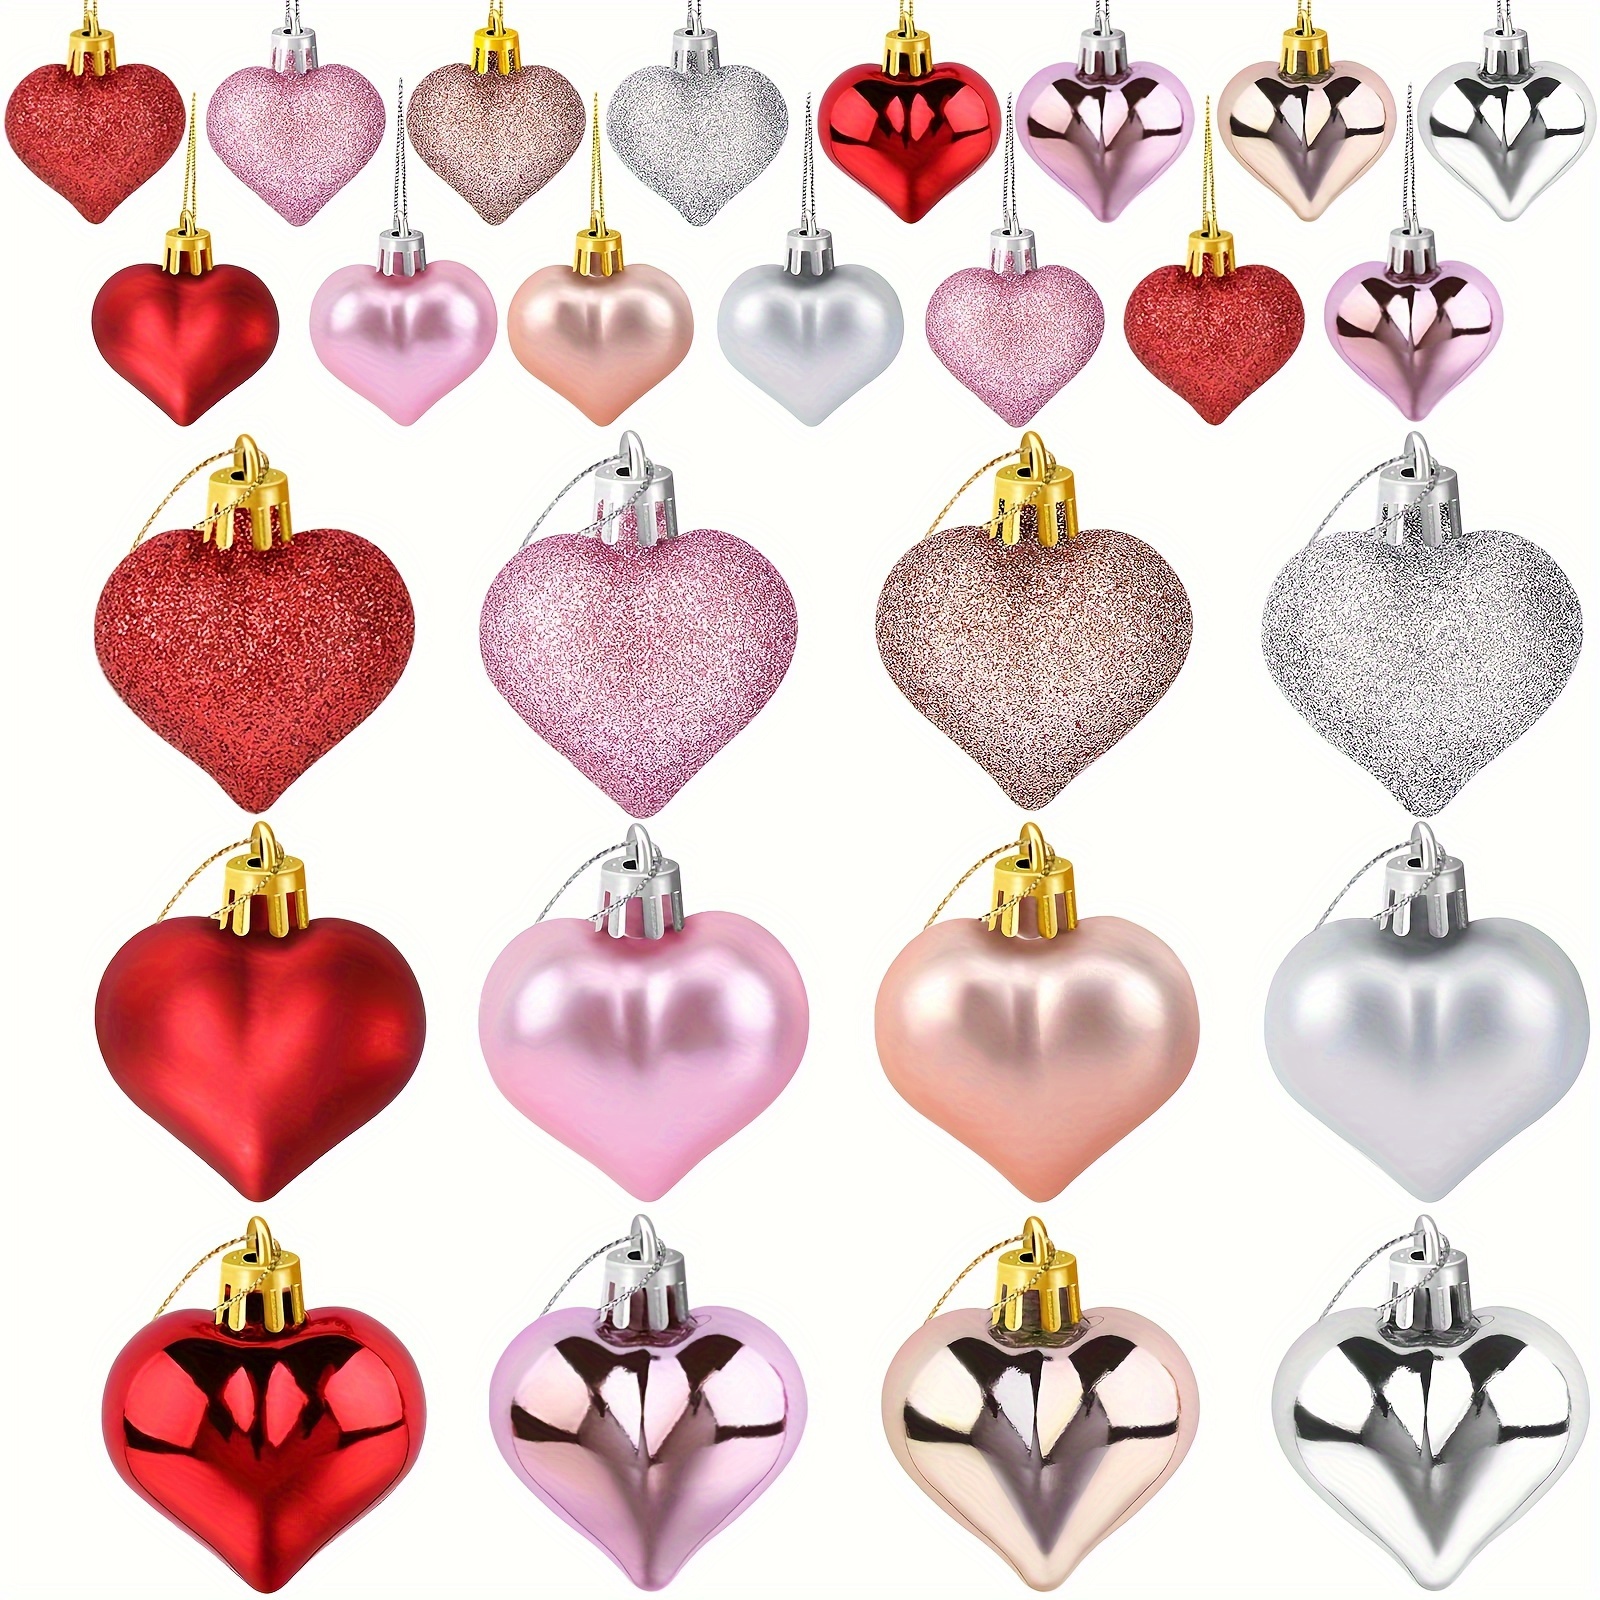 Valentines Day Decorations Heart Ornament 36pcs Rose Gold Heart